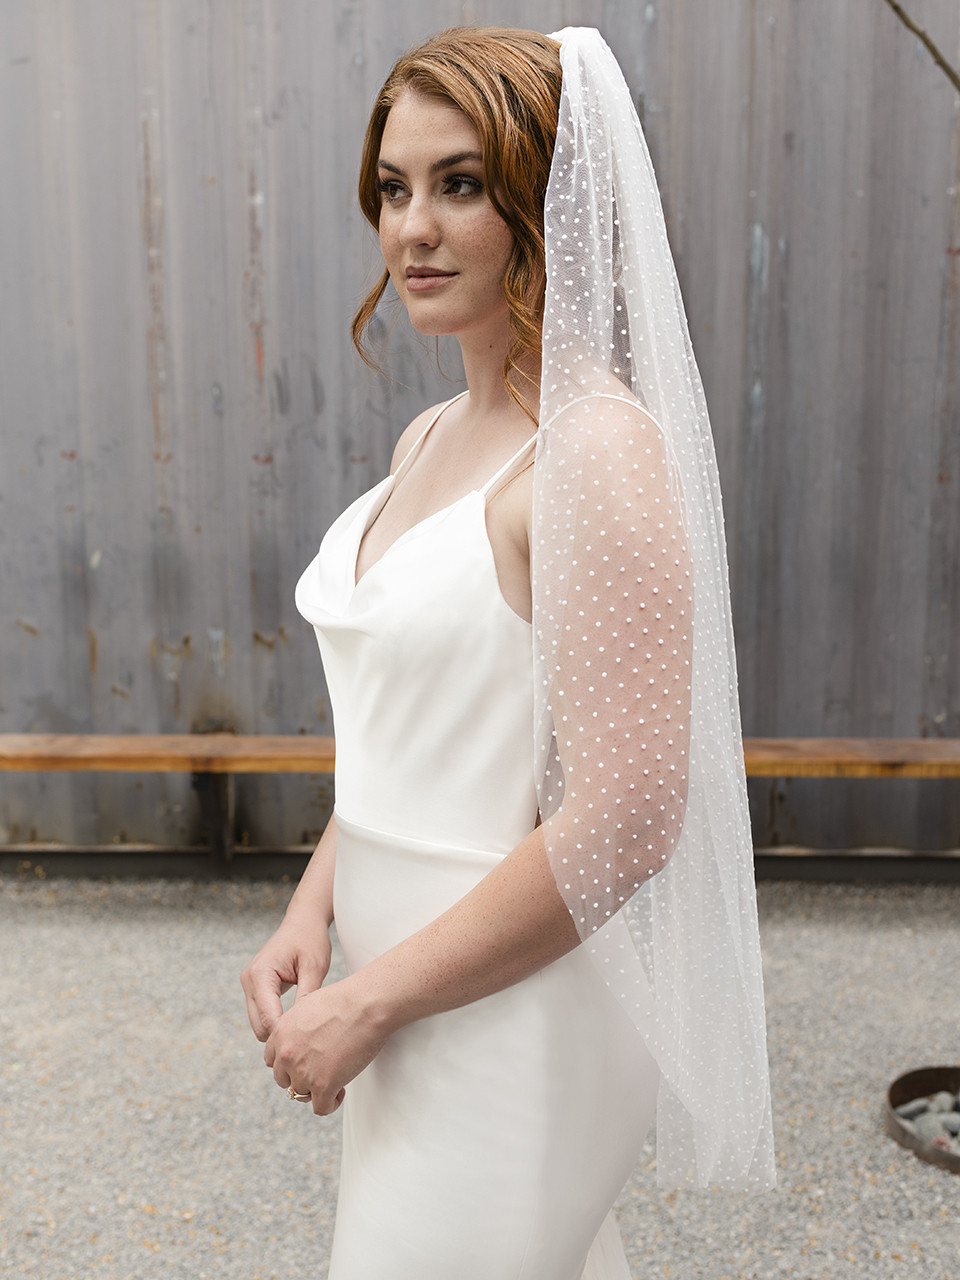 En Vogue Bridal Style V2296SF - English tulle velvet swiss dot veil with  raw edge - 41 Inches